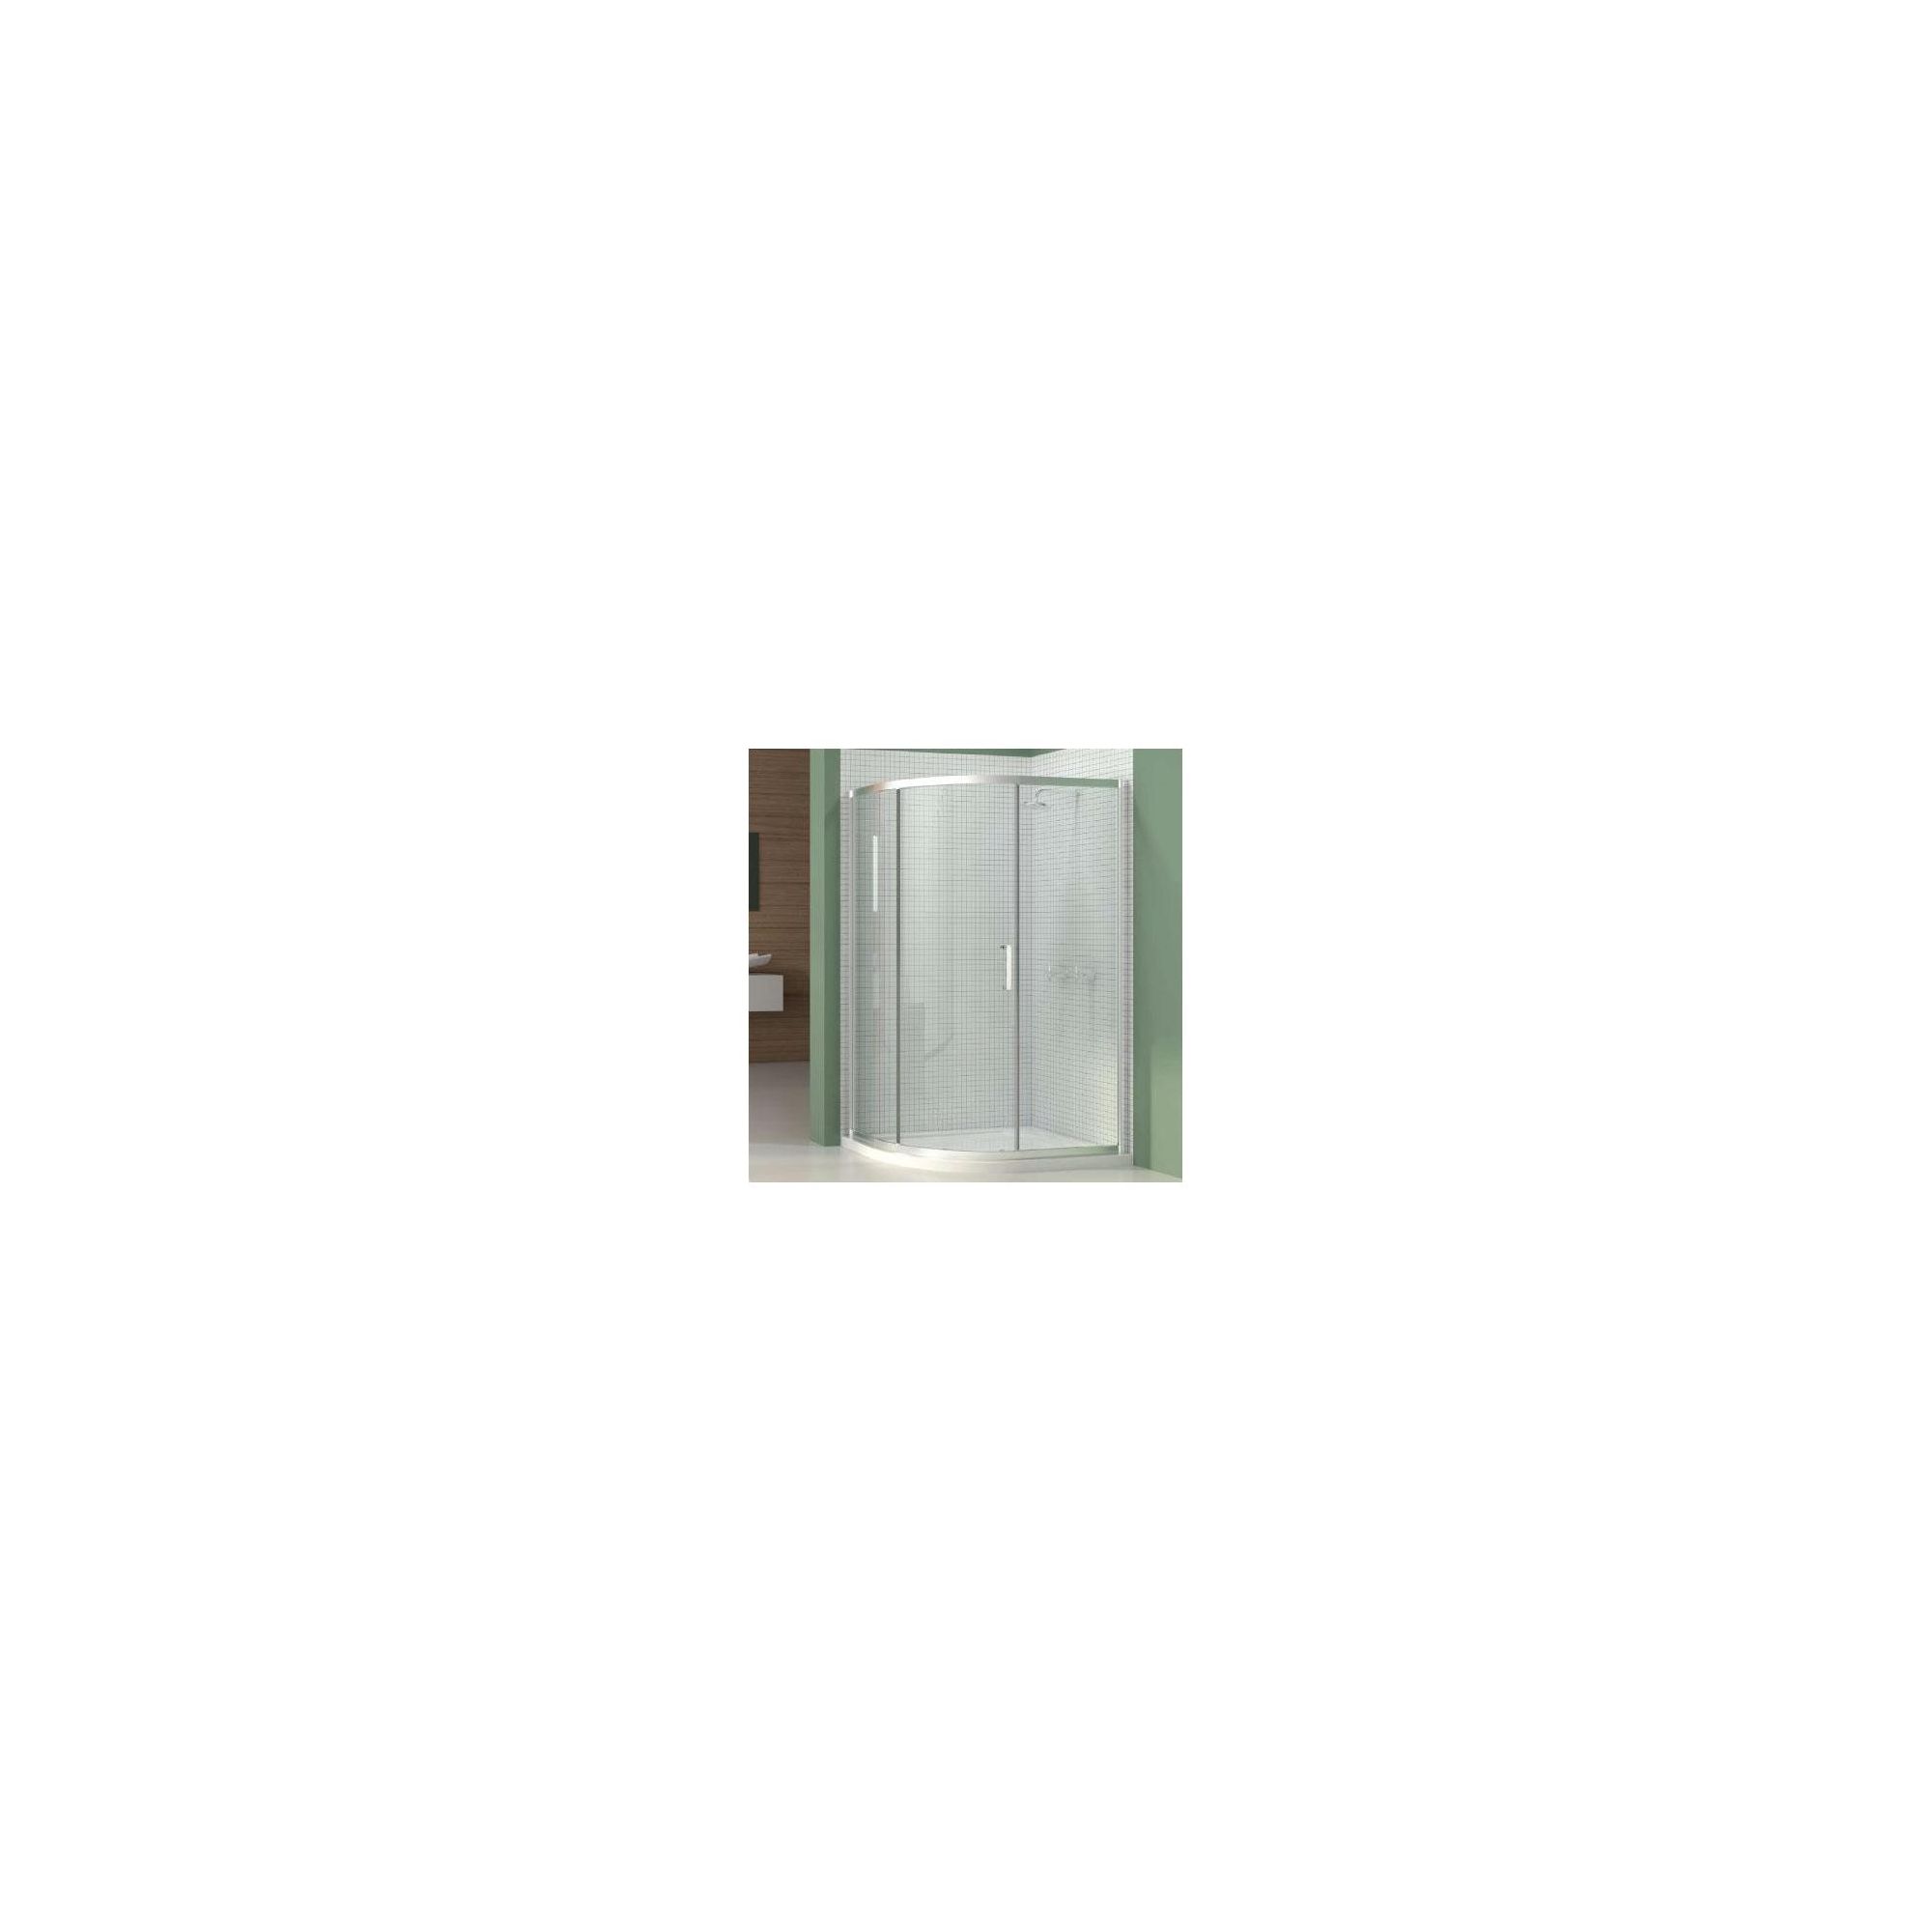 Merlyn Vivid Six Offset Quadrant Shower Enclosure, 1000mm x 800mm, Left Handed, Low Profile Tray, 6mm Glass at Tesco Direct